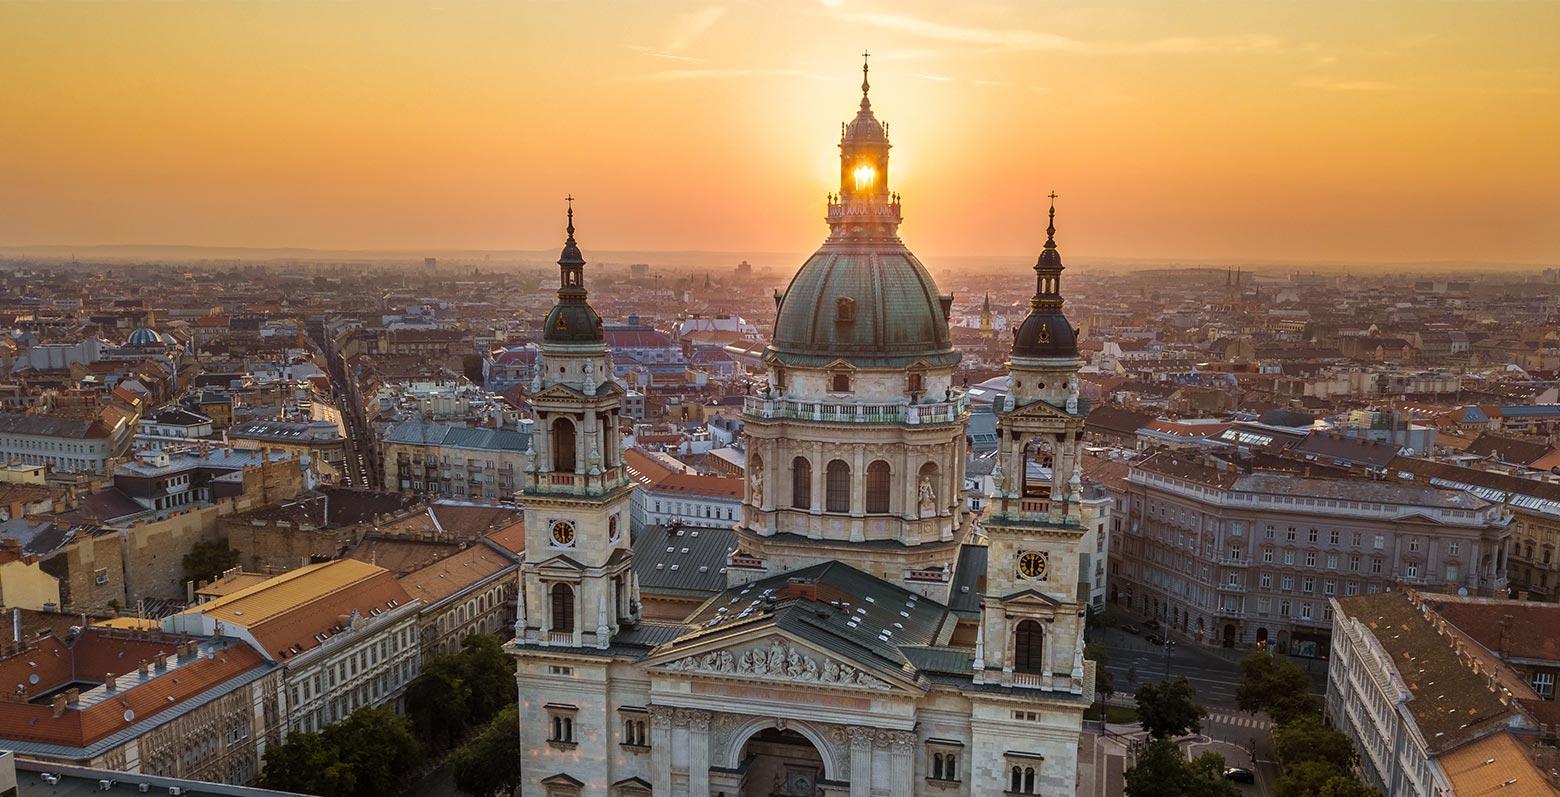 St. Stephen’s Basilica, one of the greatest landmarks of downtown Budapest